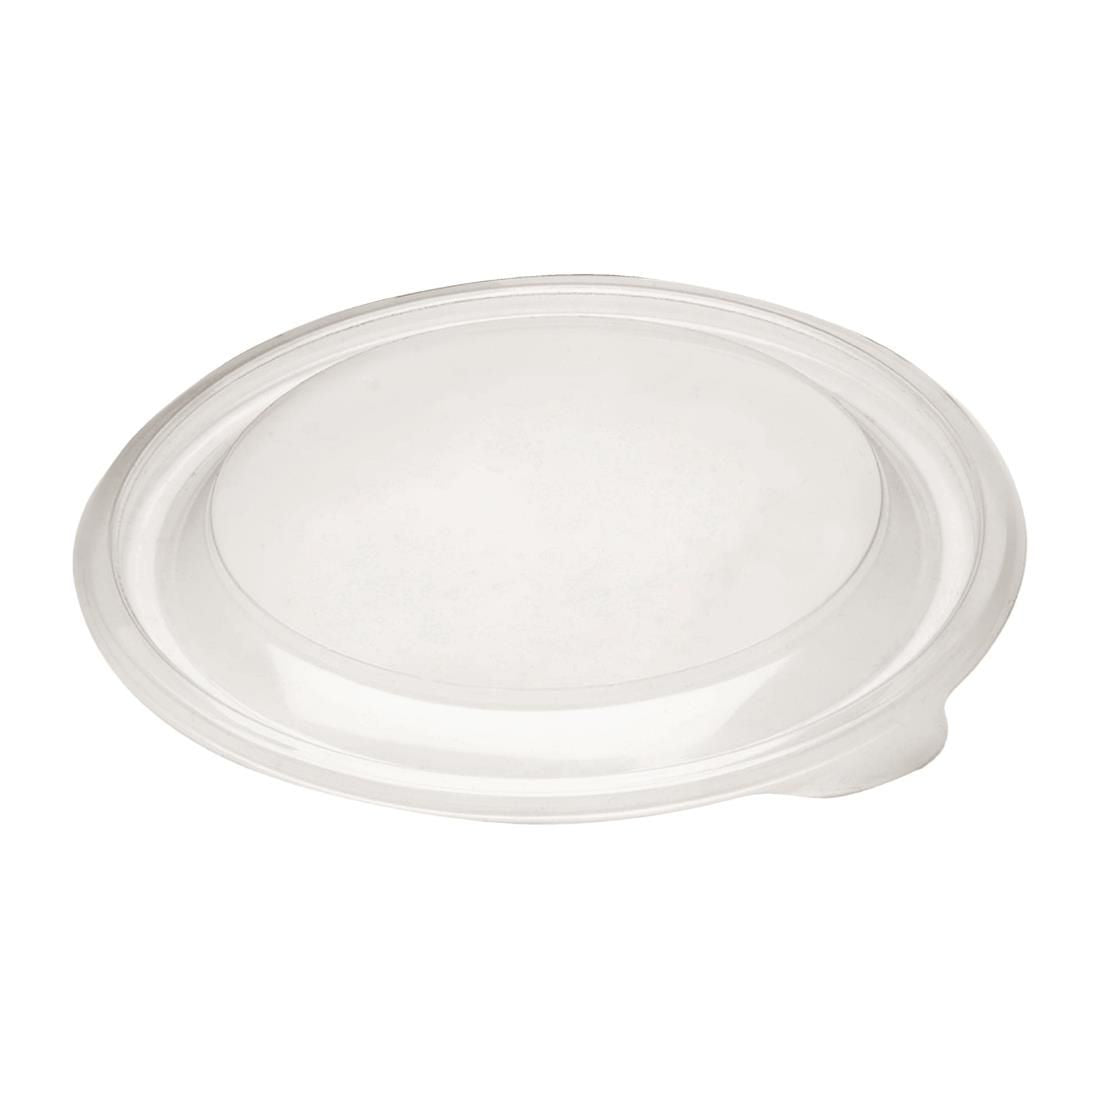 Fastpac Small Round Food Container Lids 375ml / 13oz (Pack of 500) JD Catering Equipment Solutions Ltd